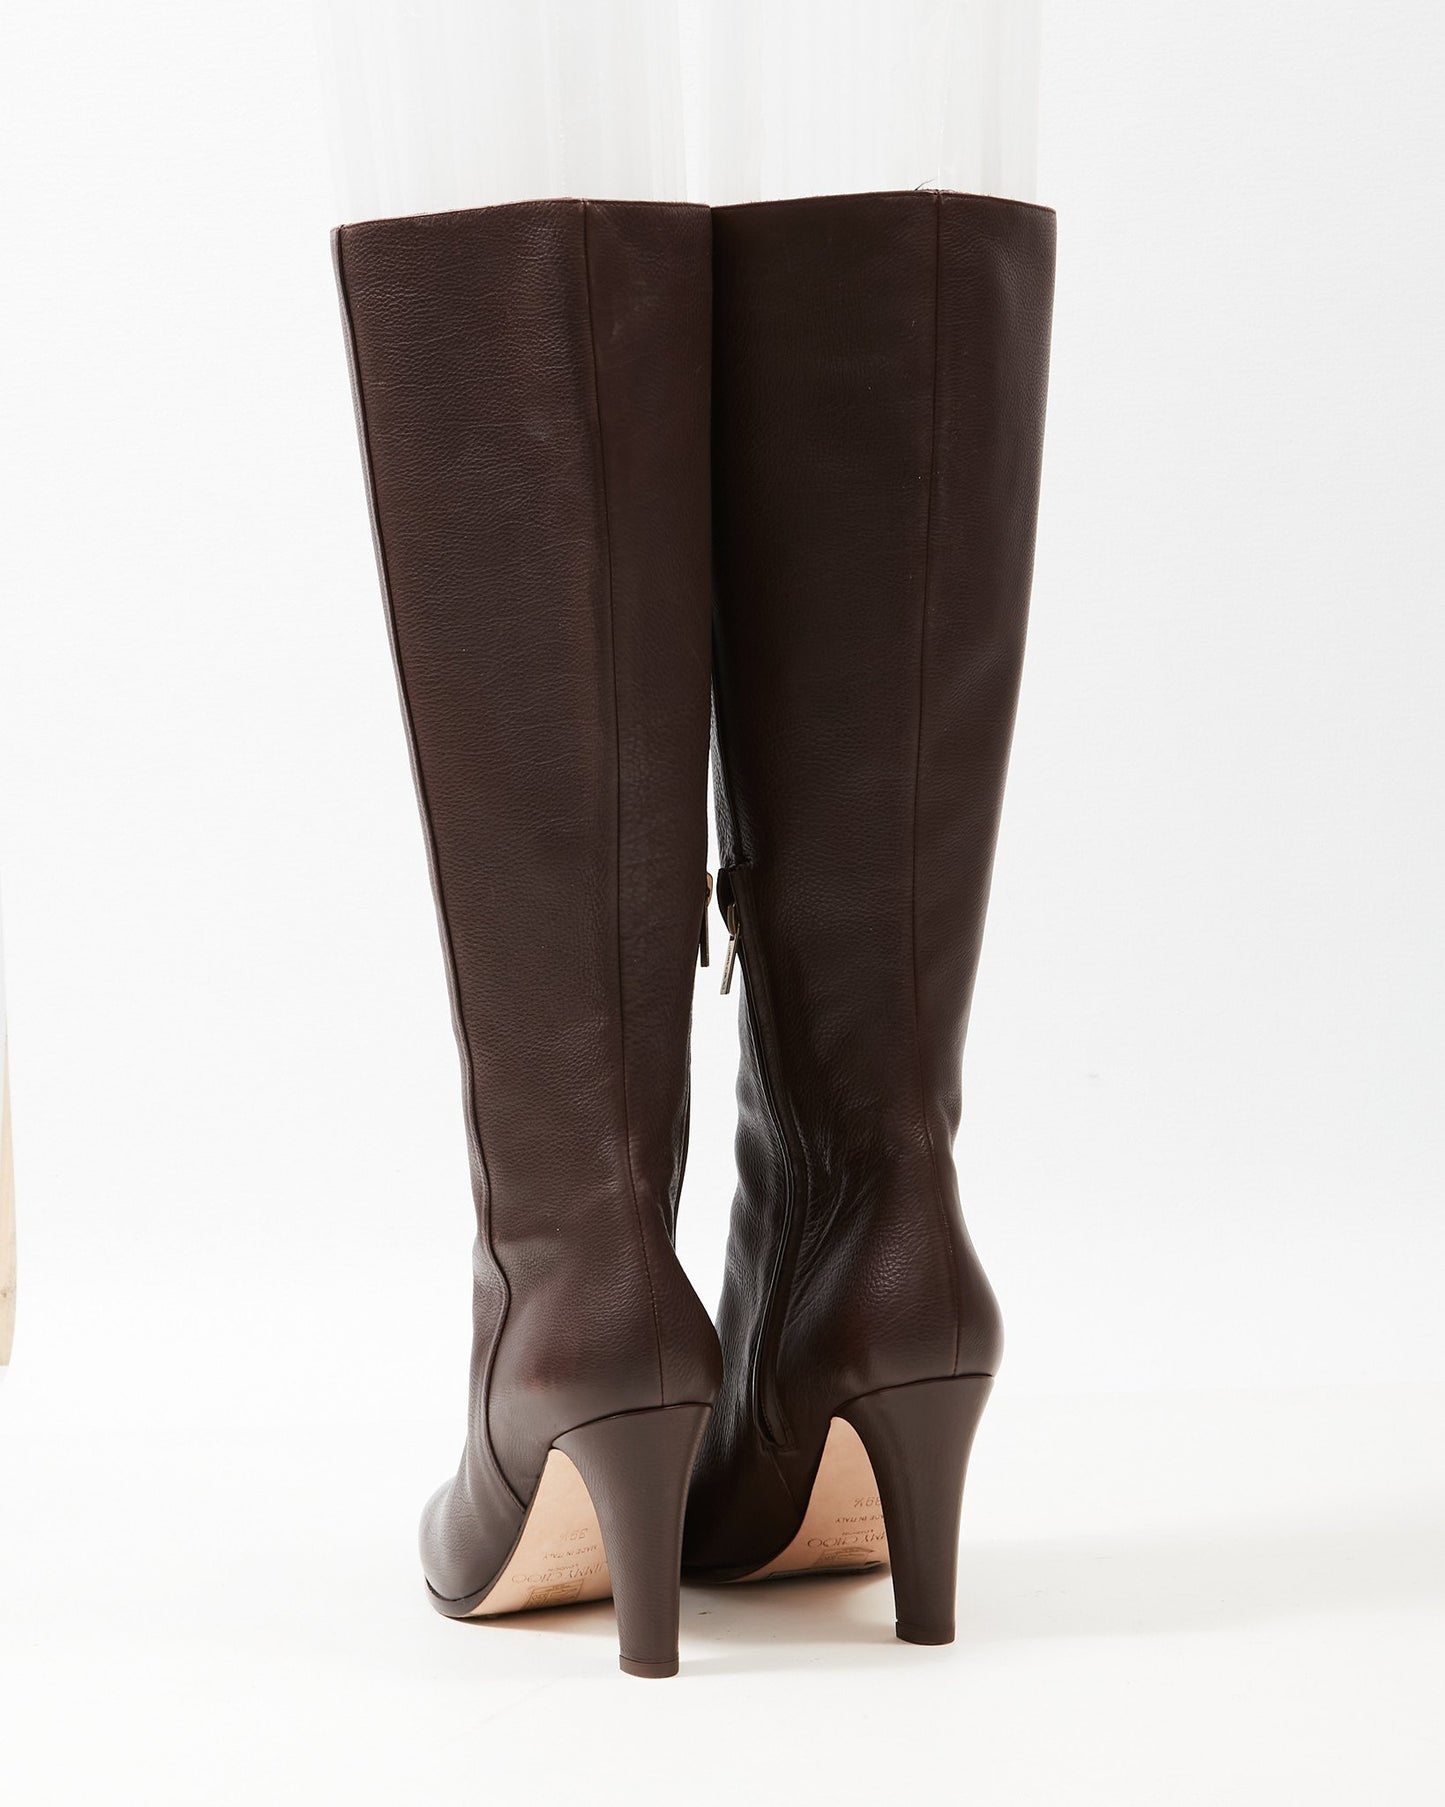 Jimmy Choo Brown Leather Knee-High Heeled Boots - 39.5